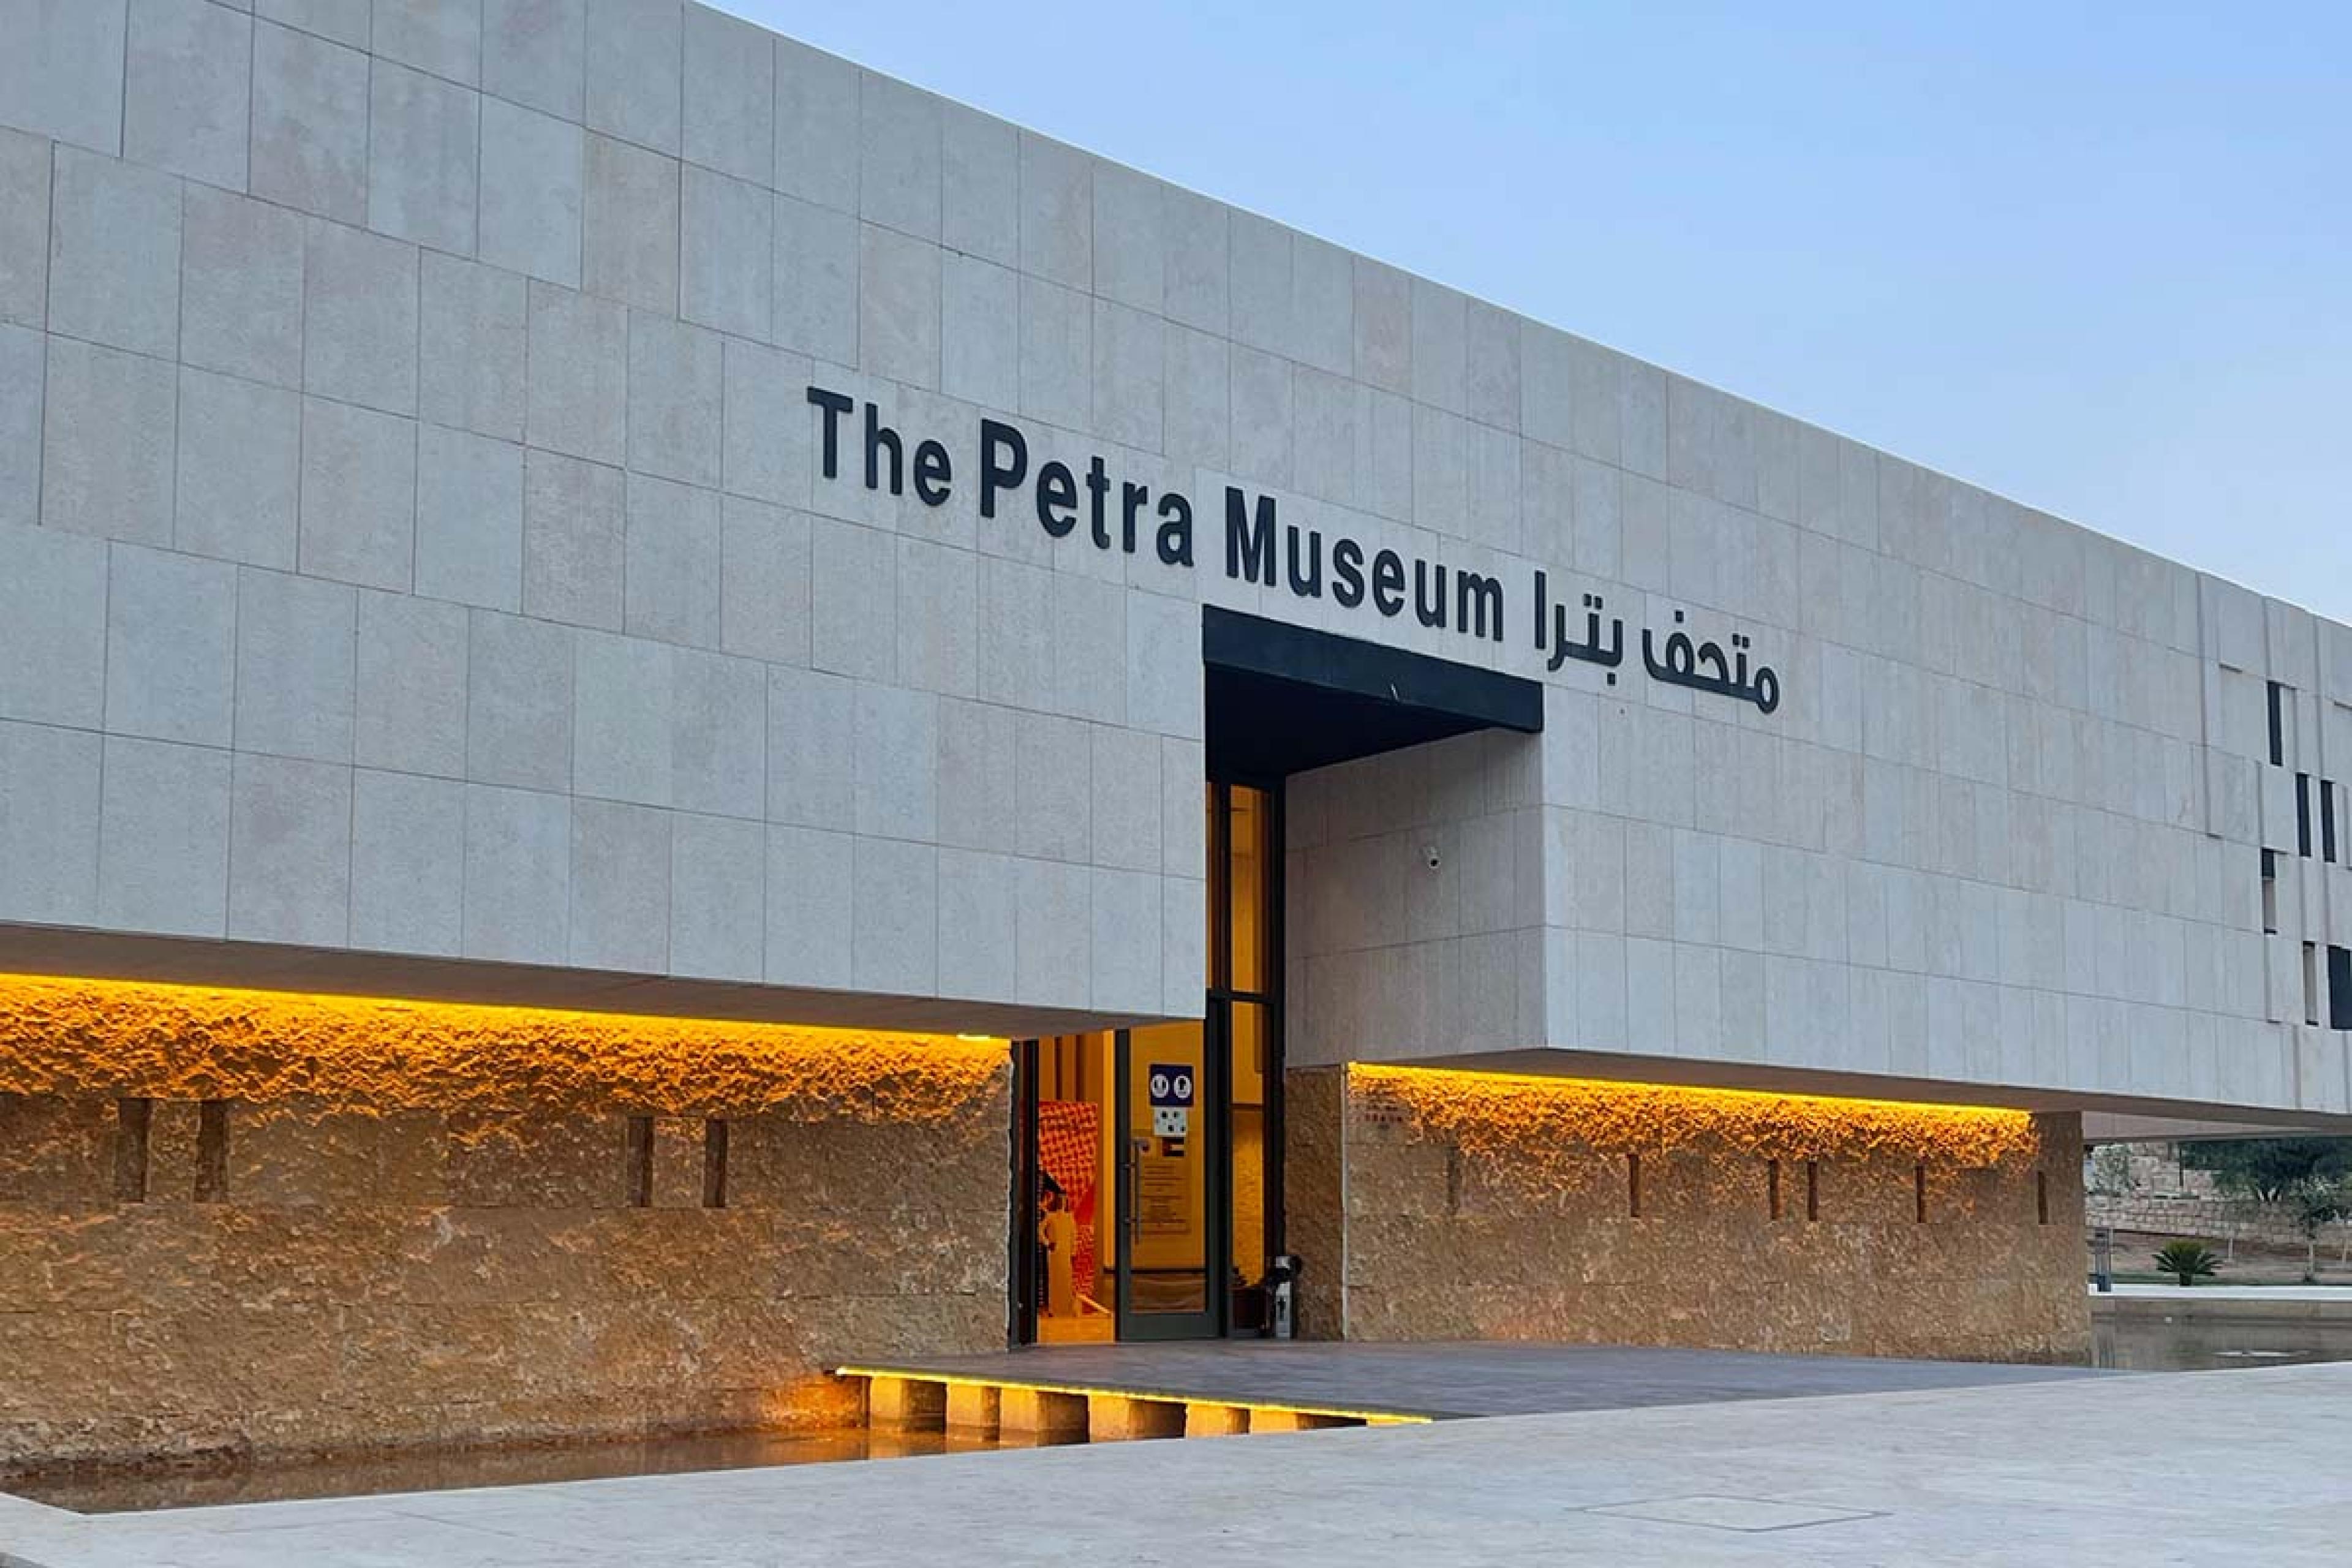 stone museum with "The Petra Museum" written in black letters